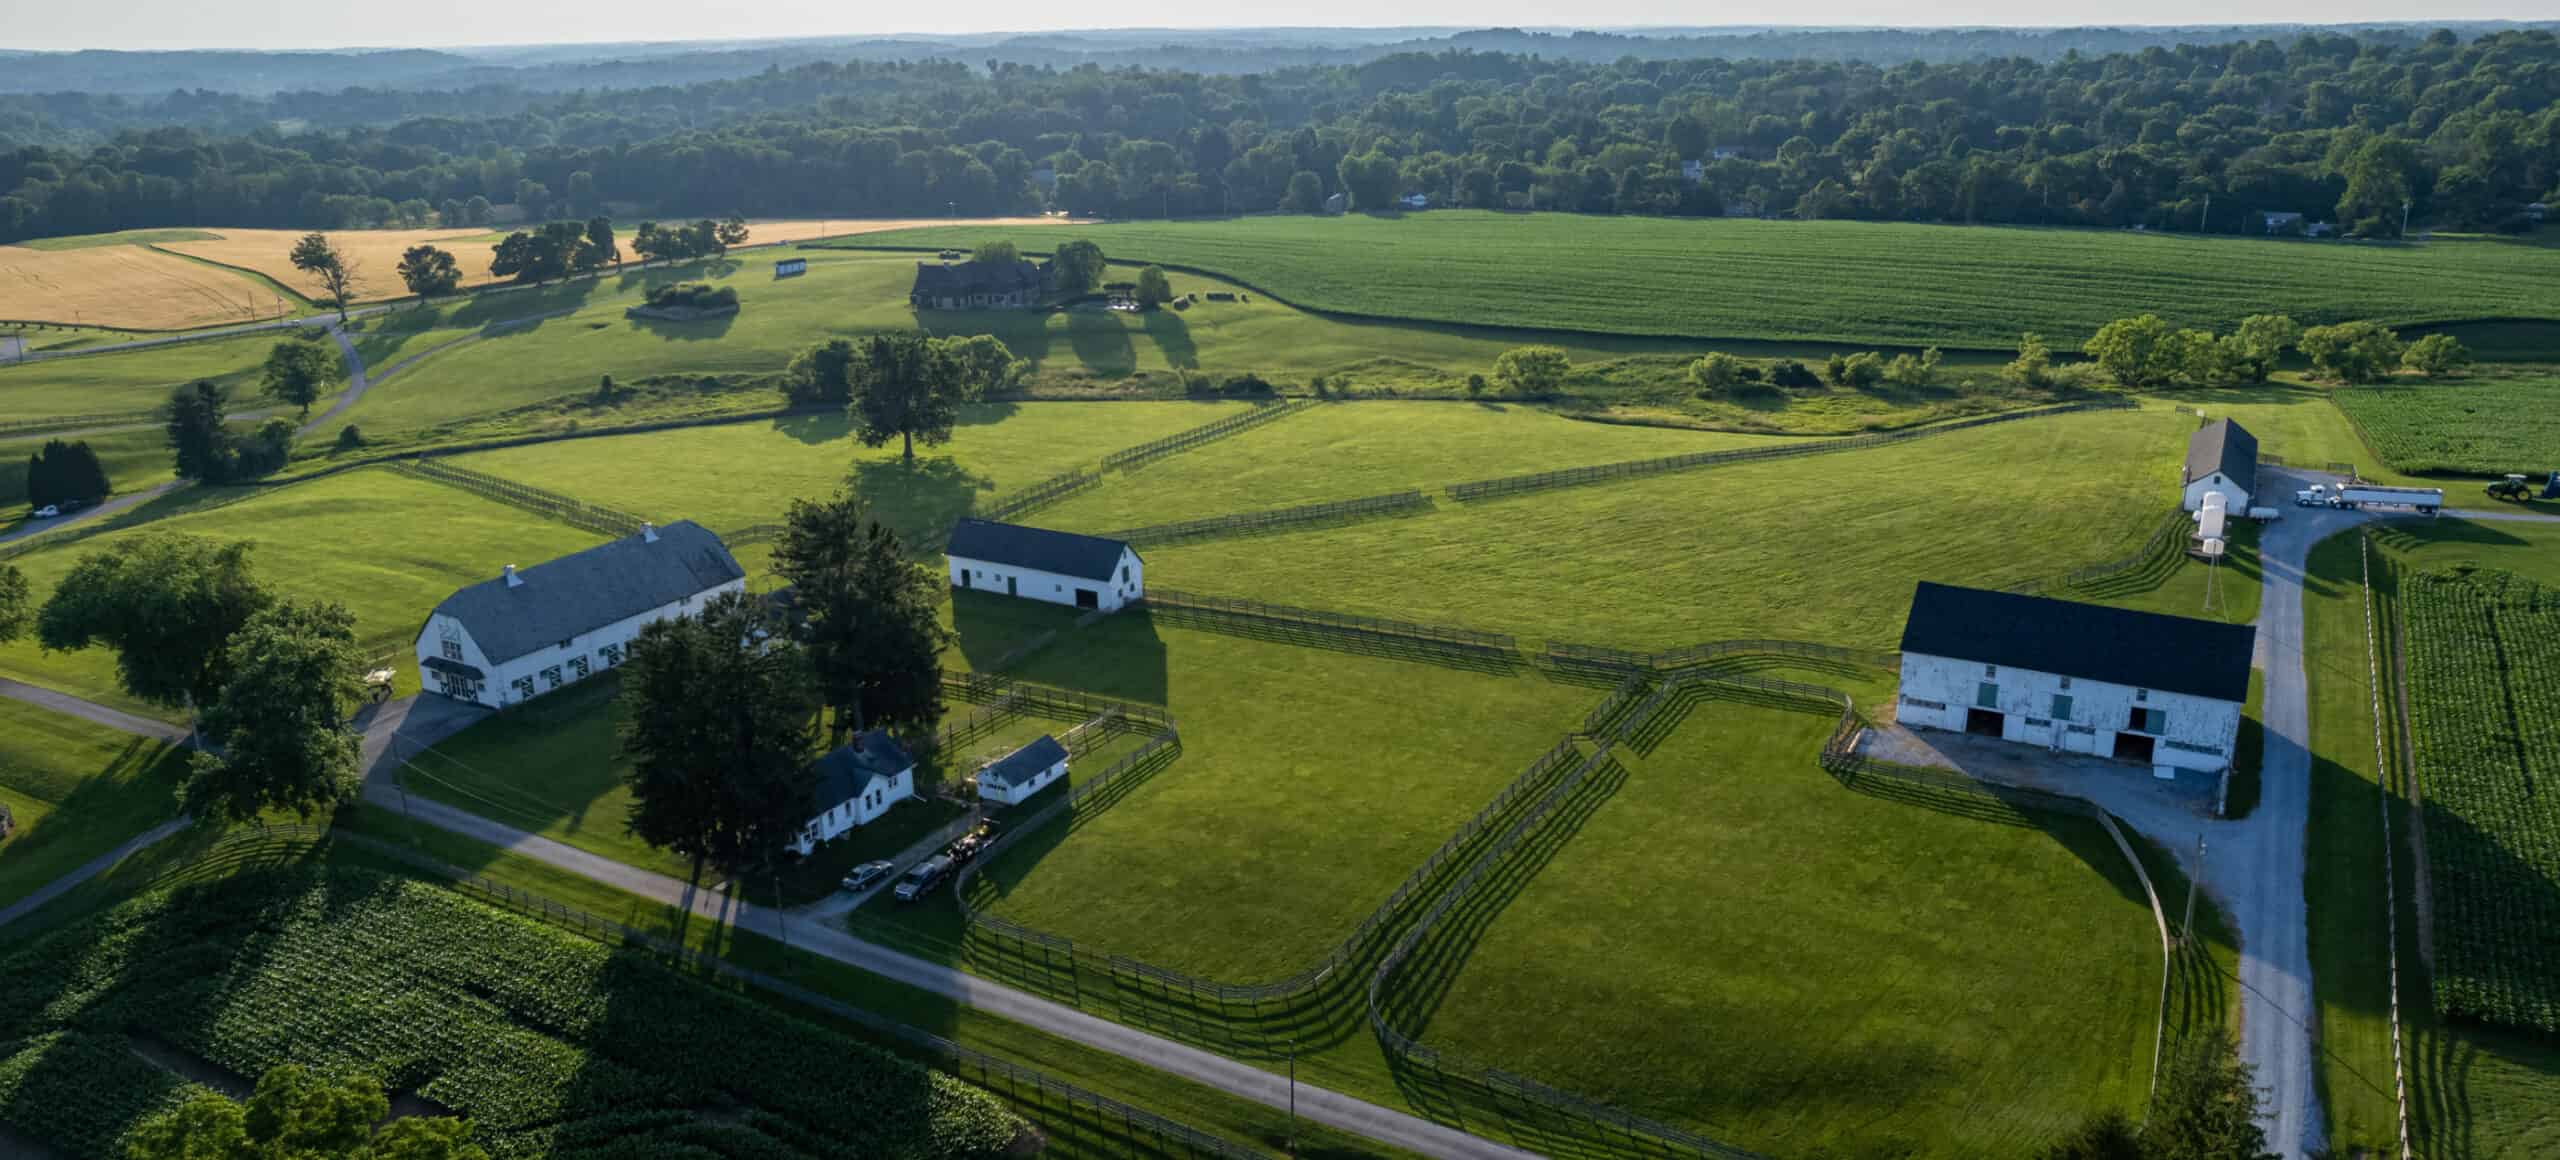 Drone photo of the green landscape of Crebilly Farm in Chester County.